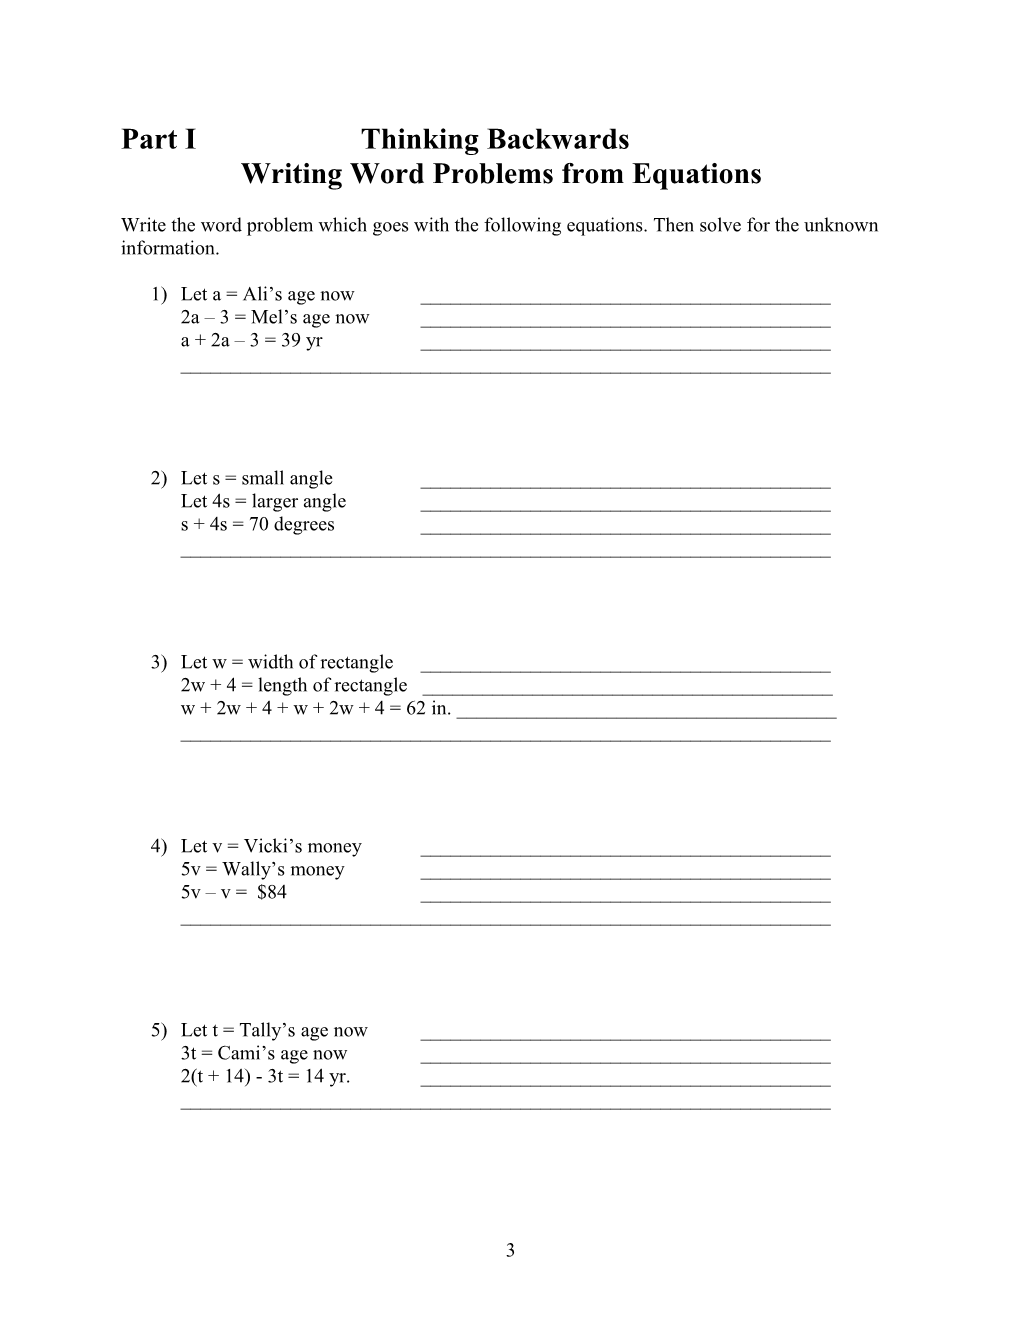 Writing Word Problems from Given Equations